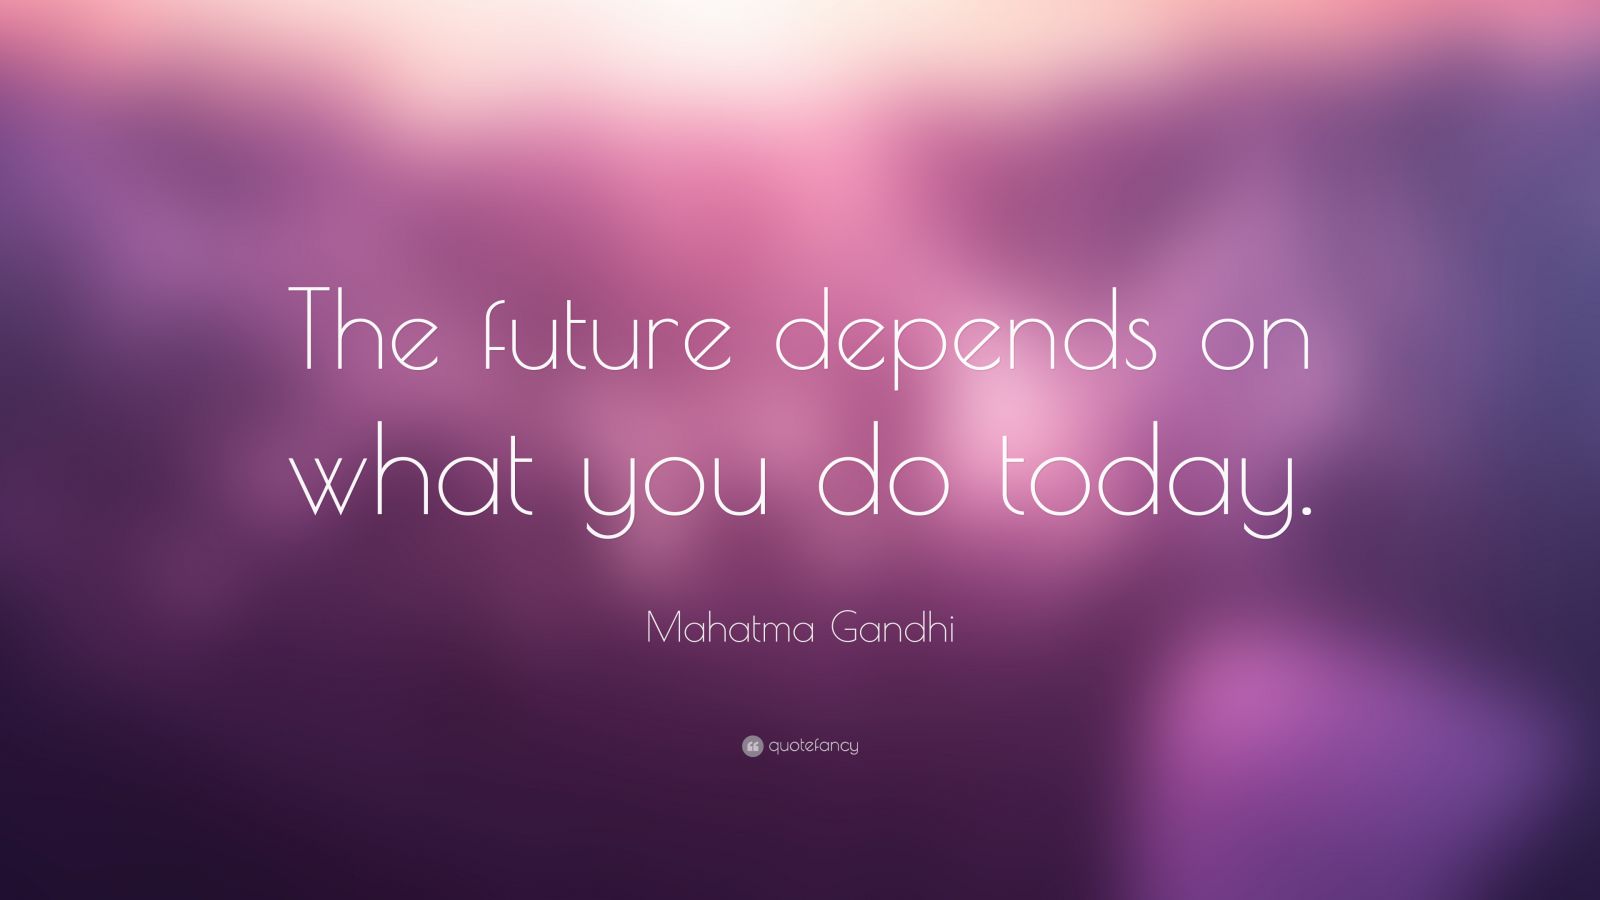 Mahatma Gandhi Quote: “The future depends on what you do today.” (31